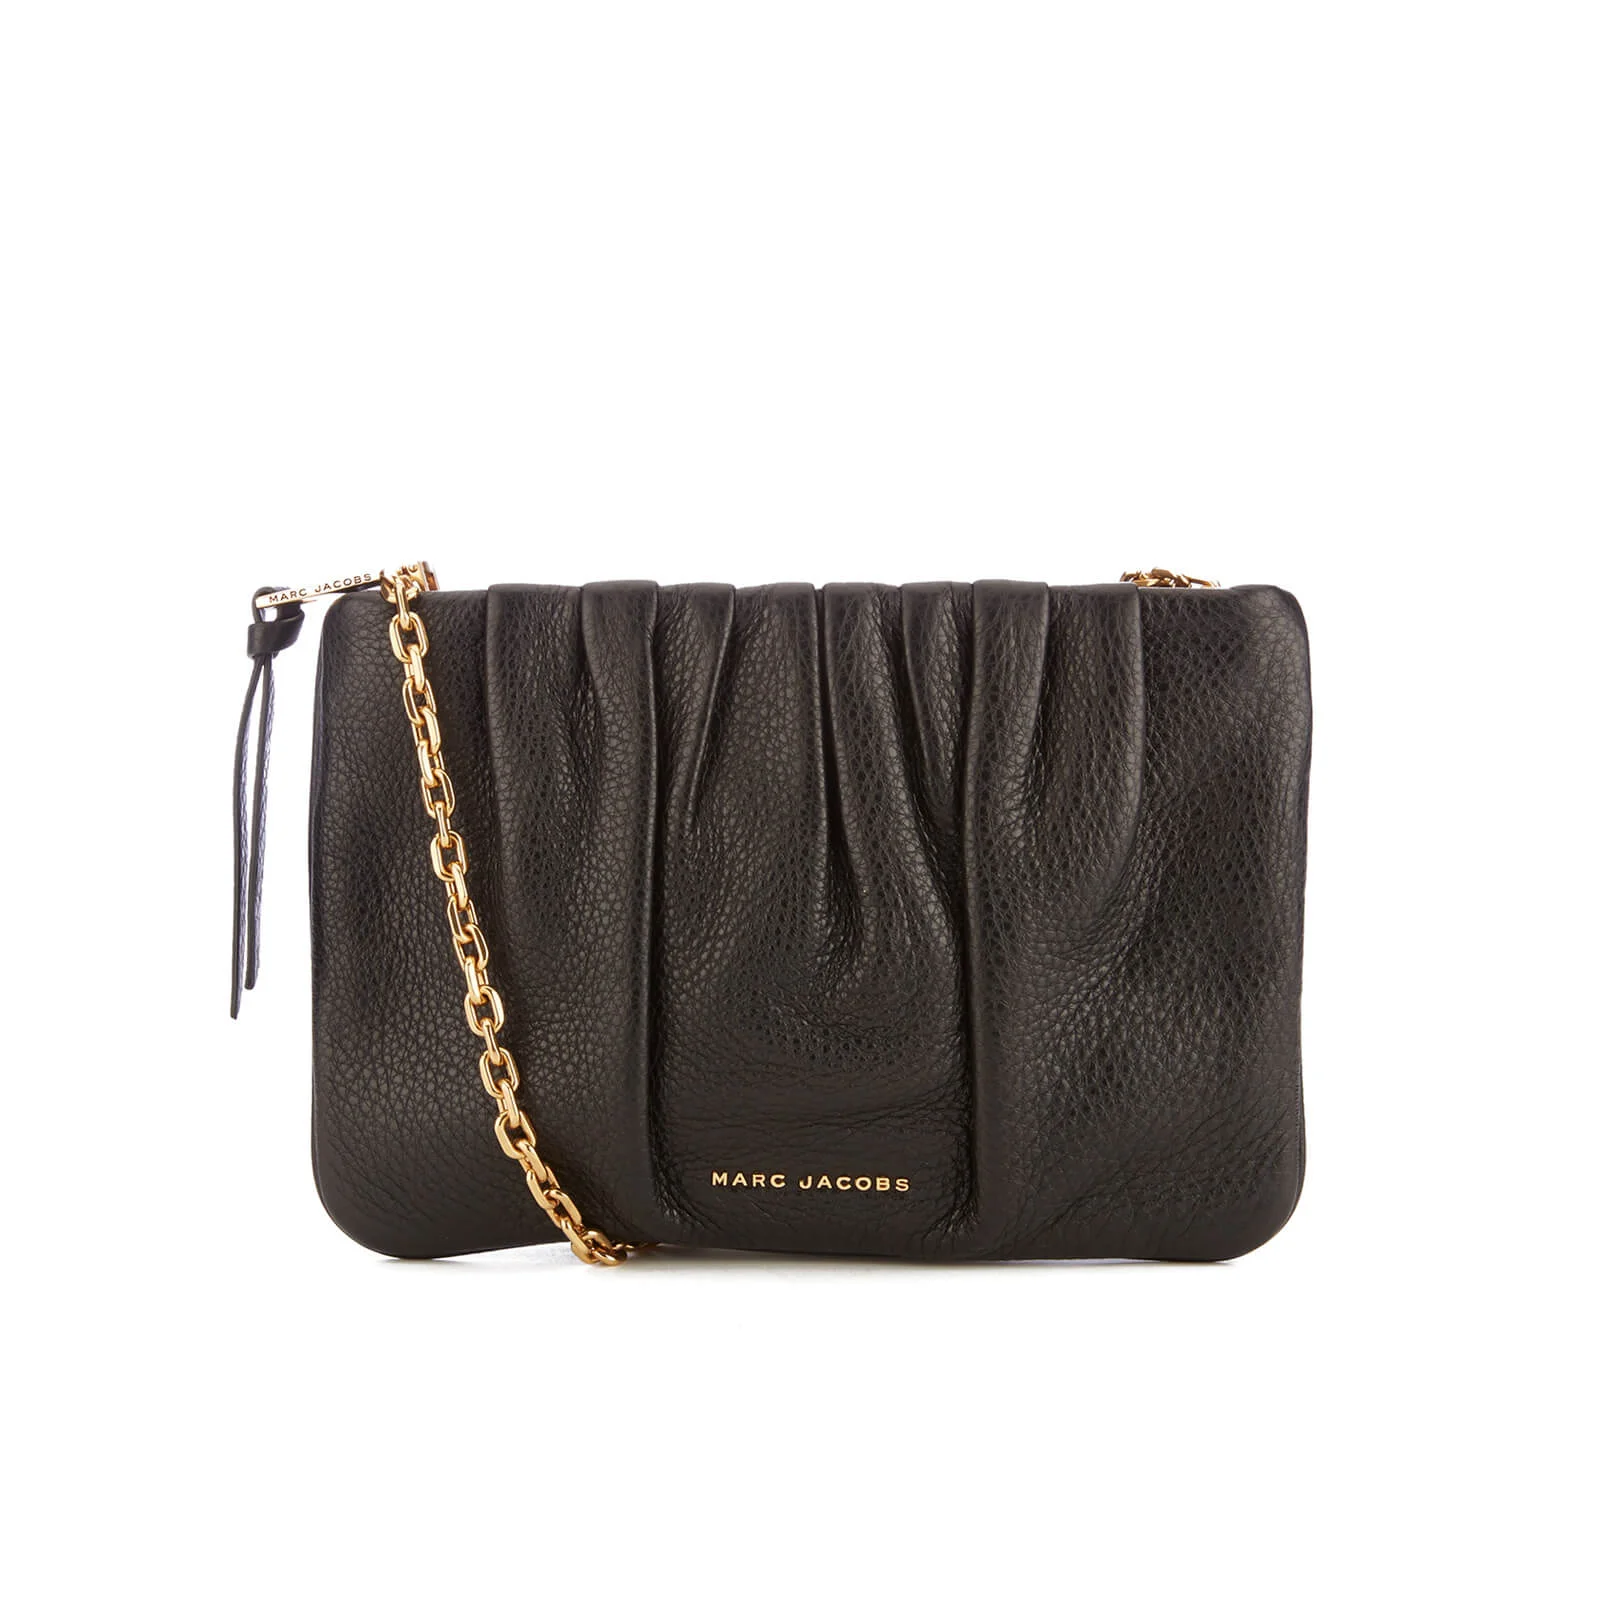 Marc Jacobs Women's Gathered Pouch Bag with Chain - Black Image 1